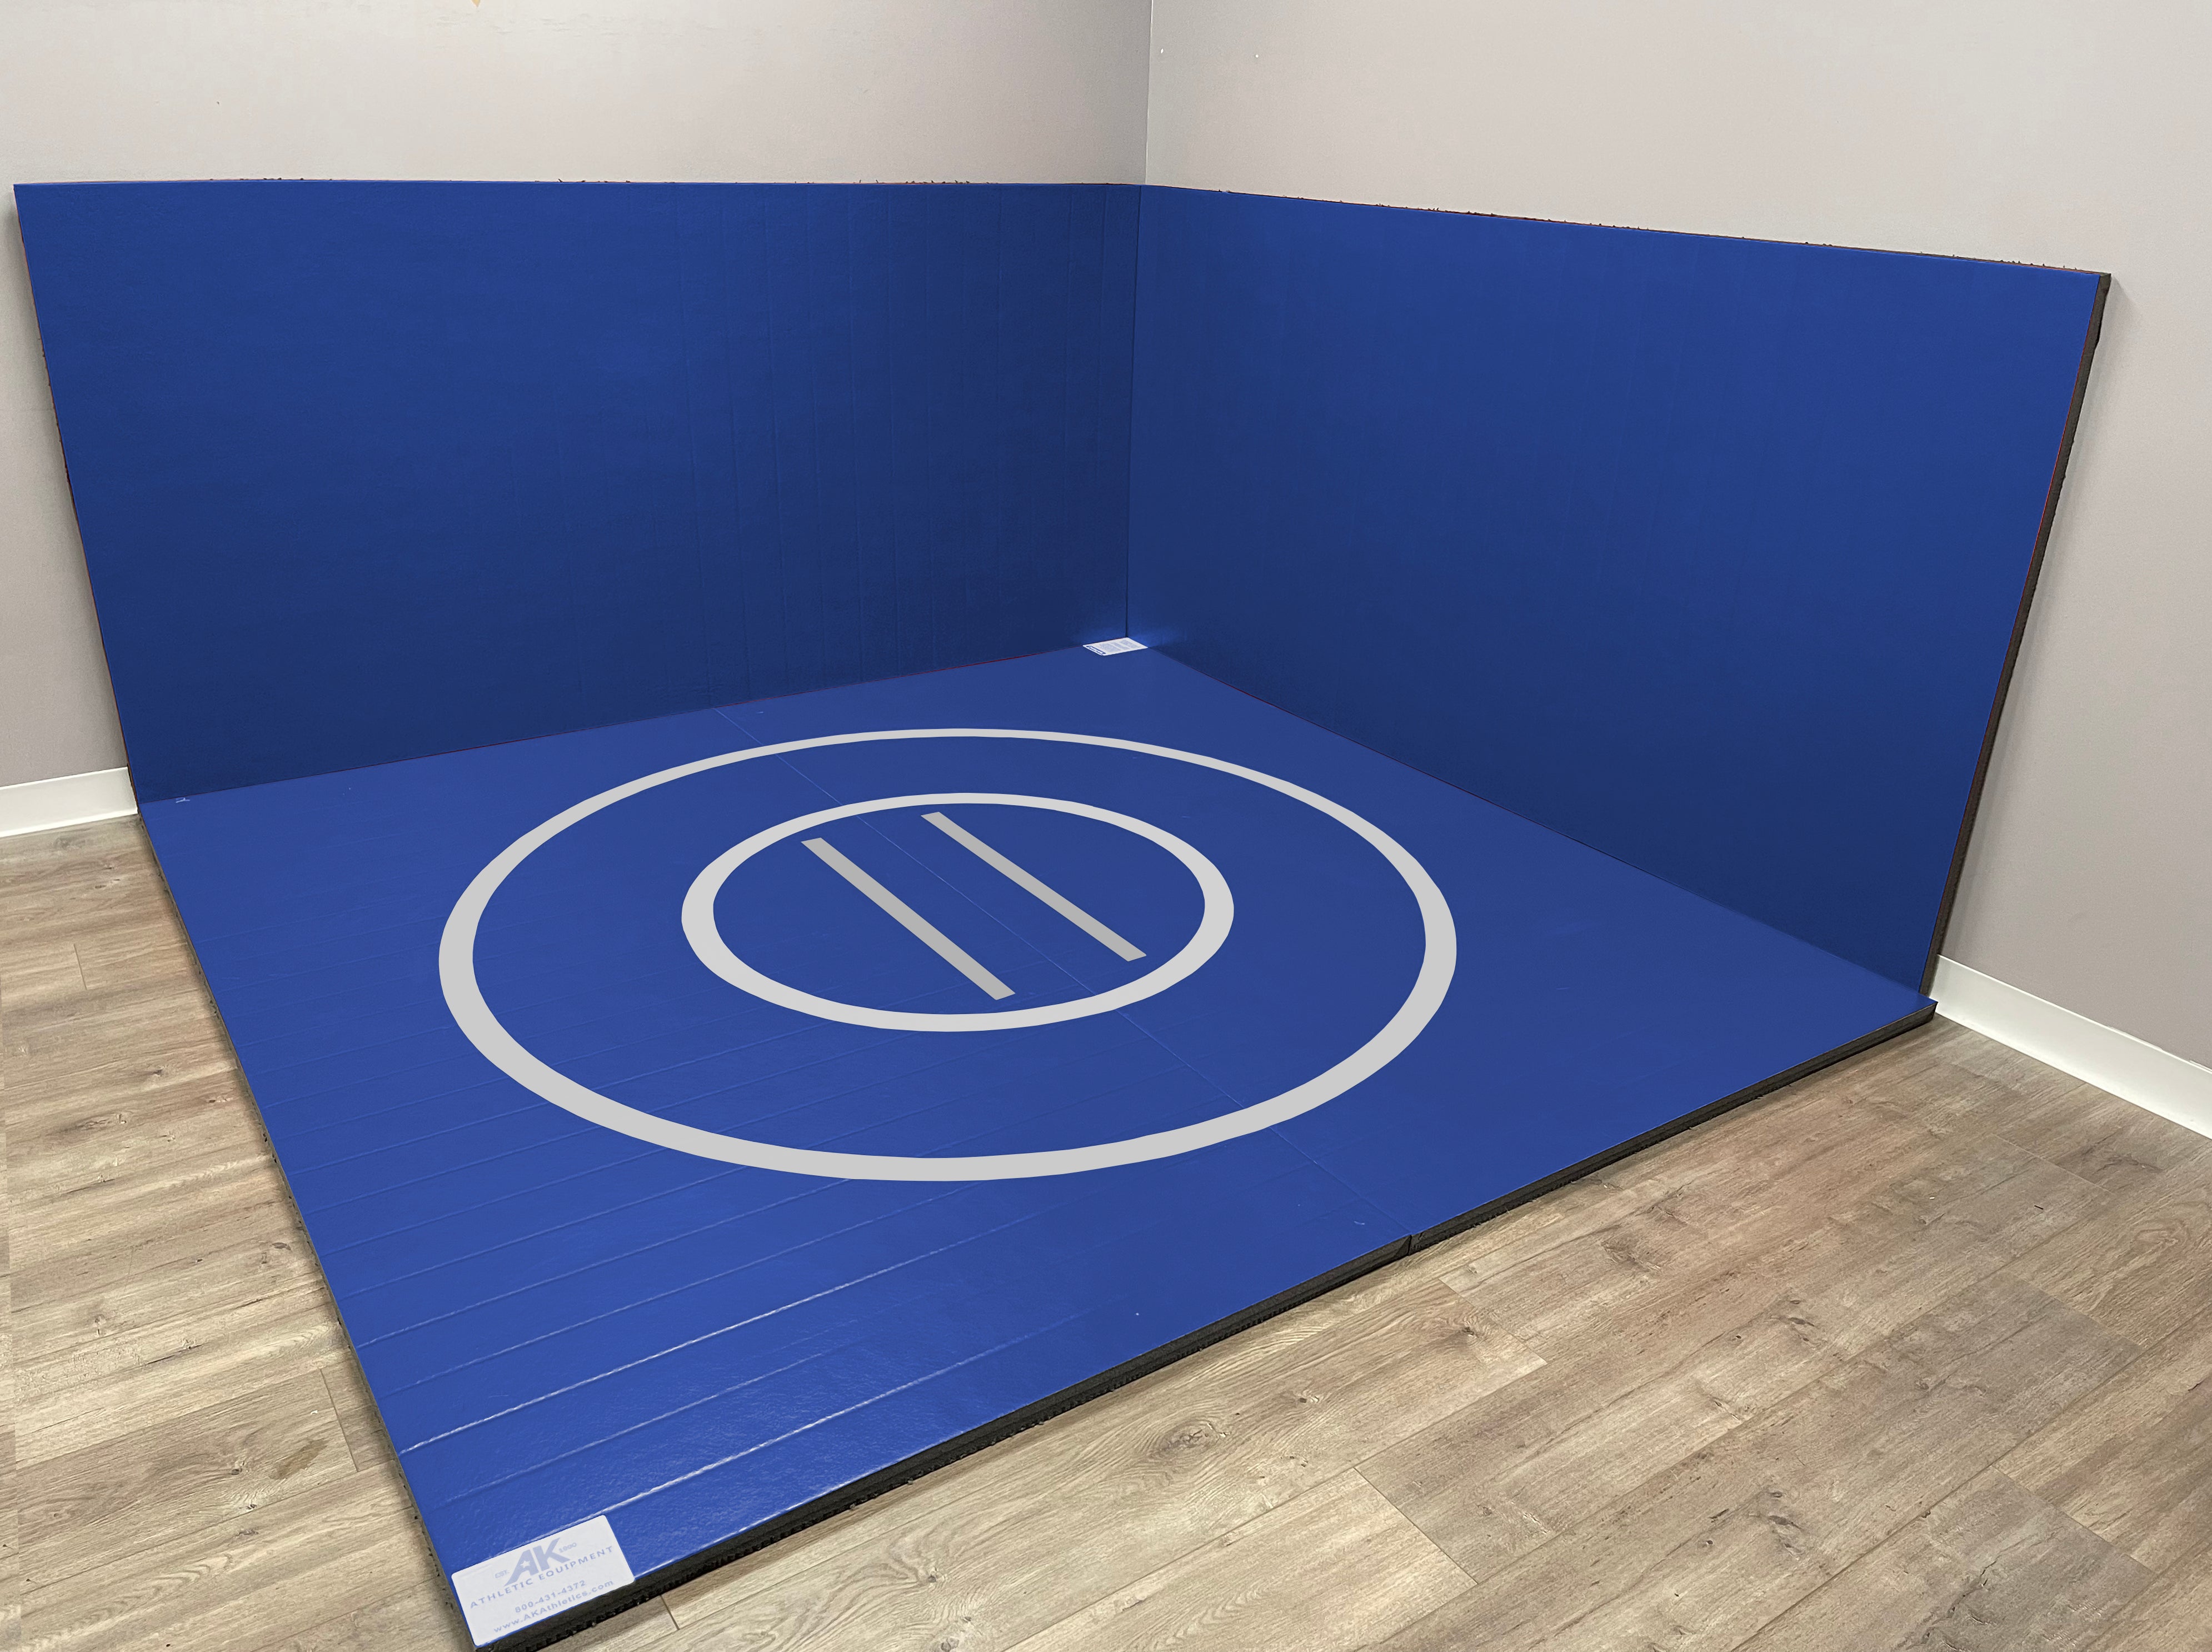 Instant Wrestling Room 8' x 8' wrestling mat and Removable Roll Up Wall Pads Package